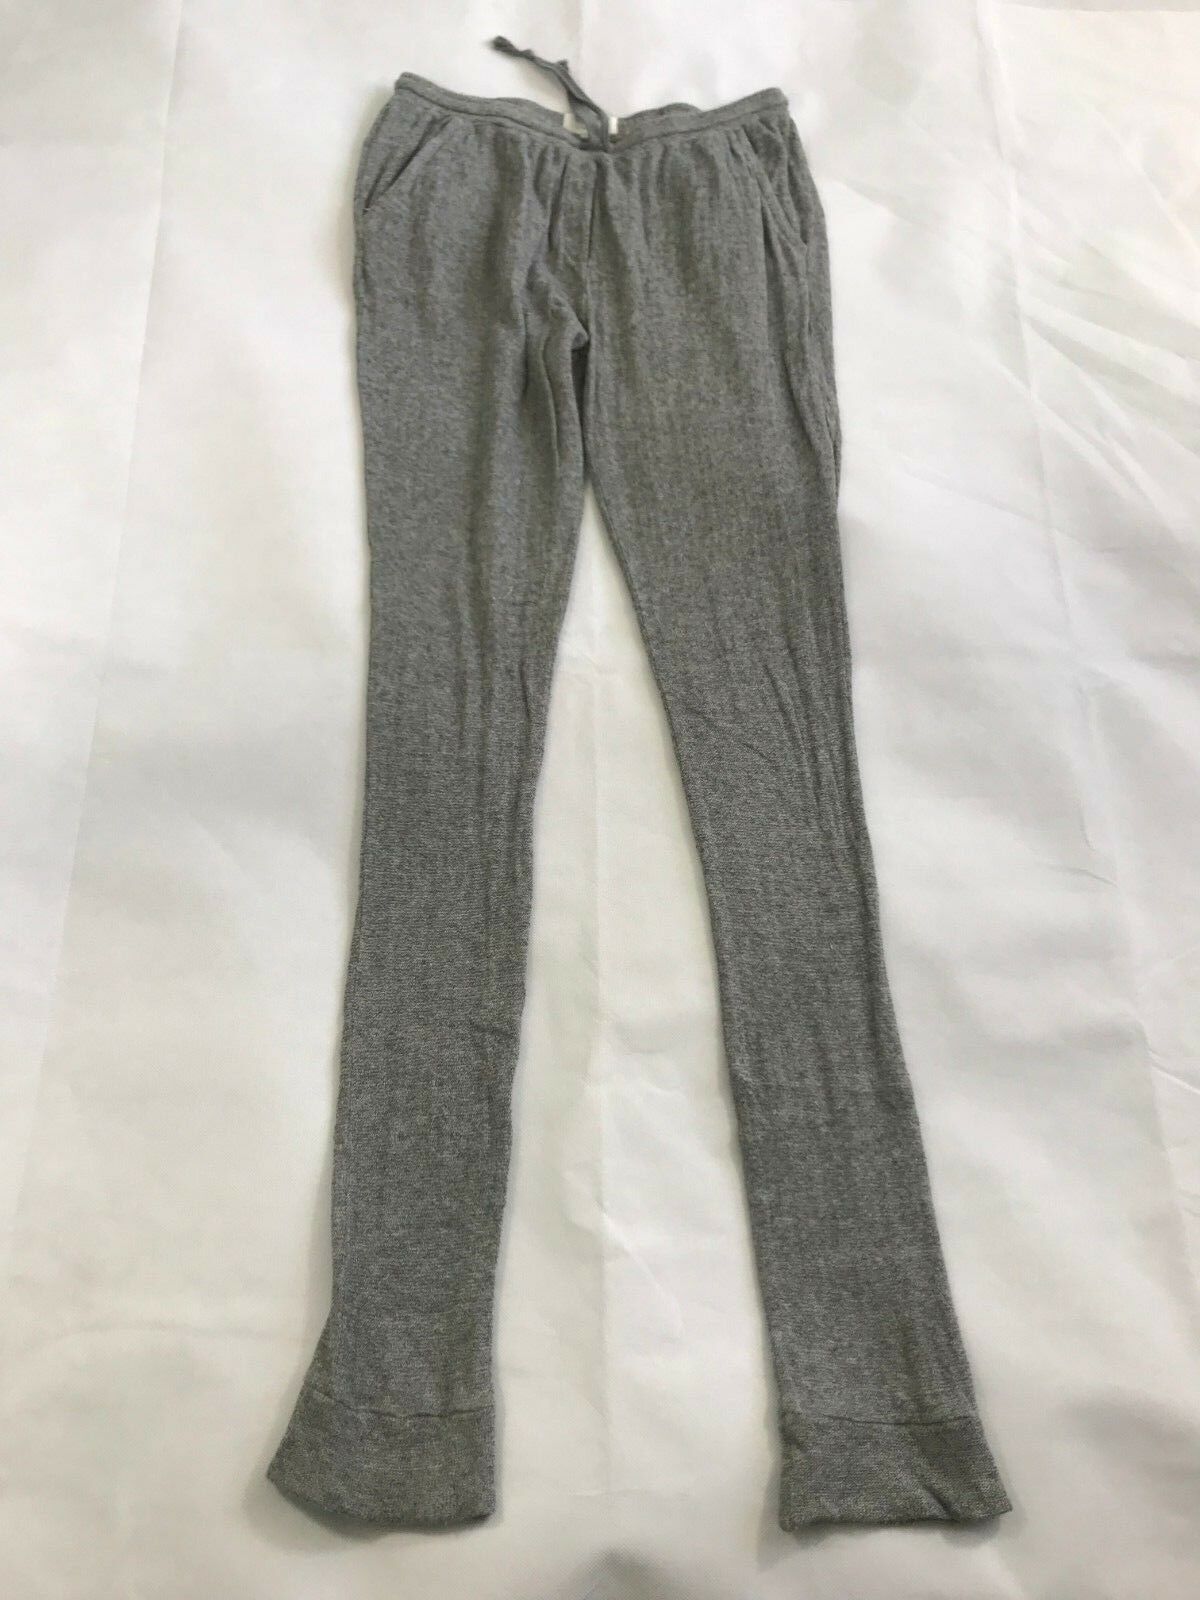 country road track pants